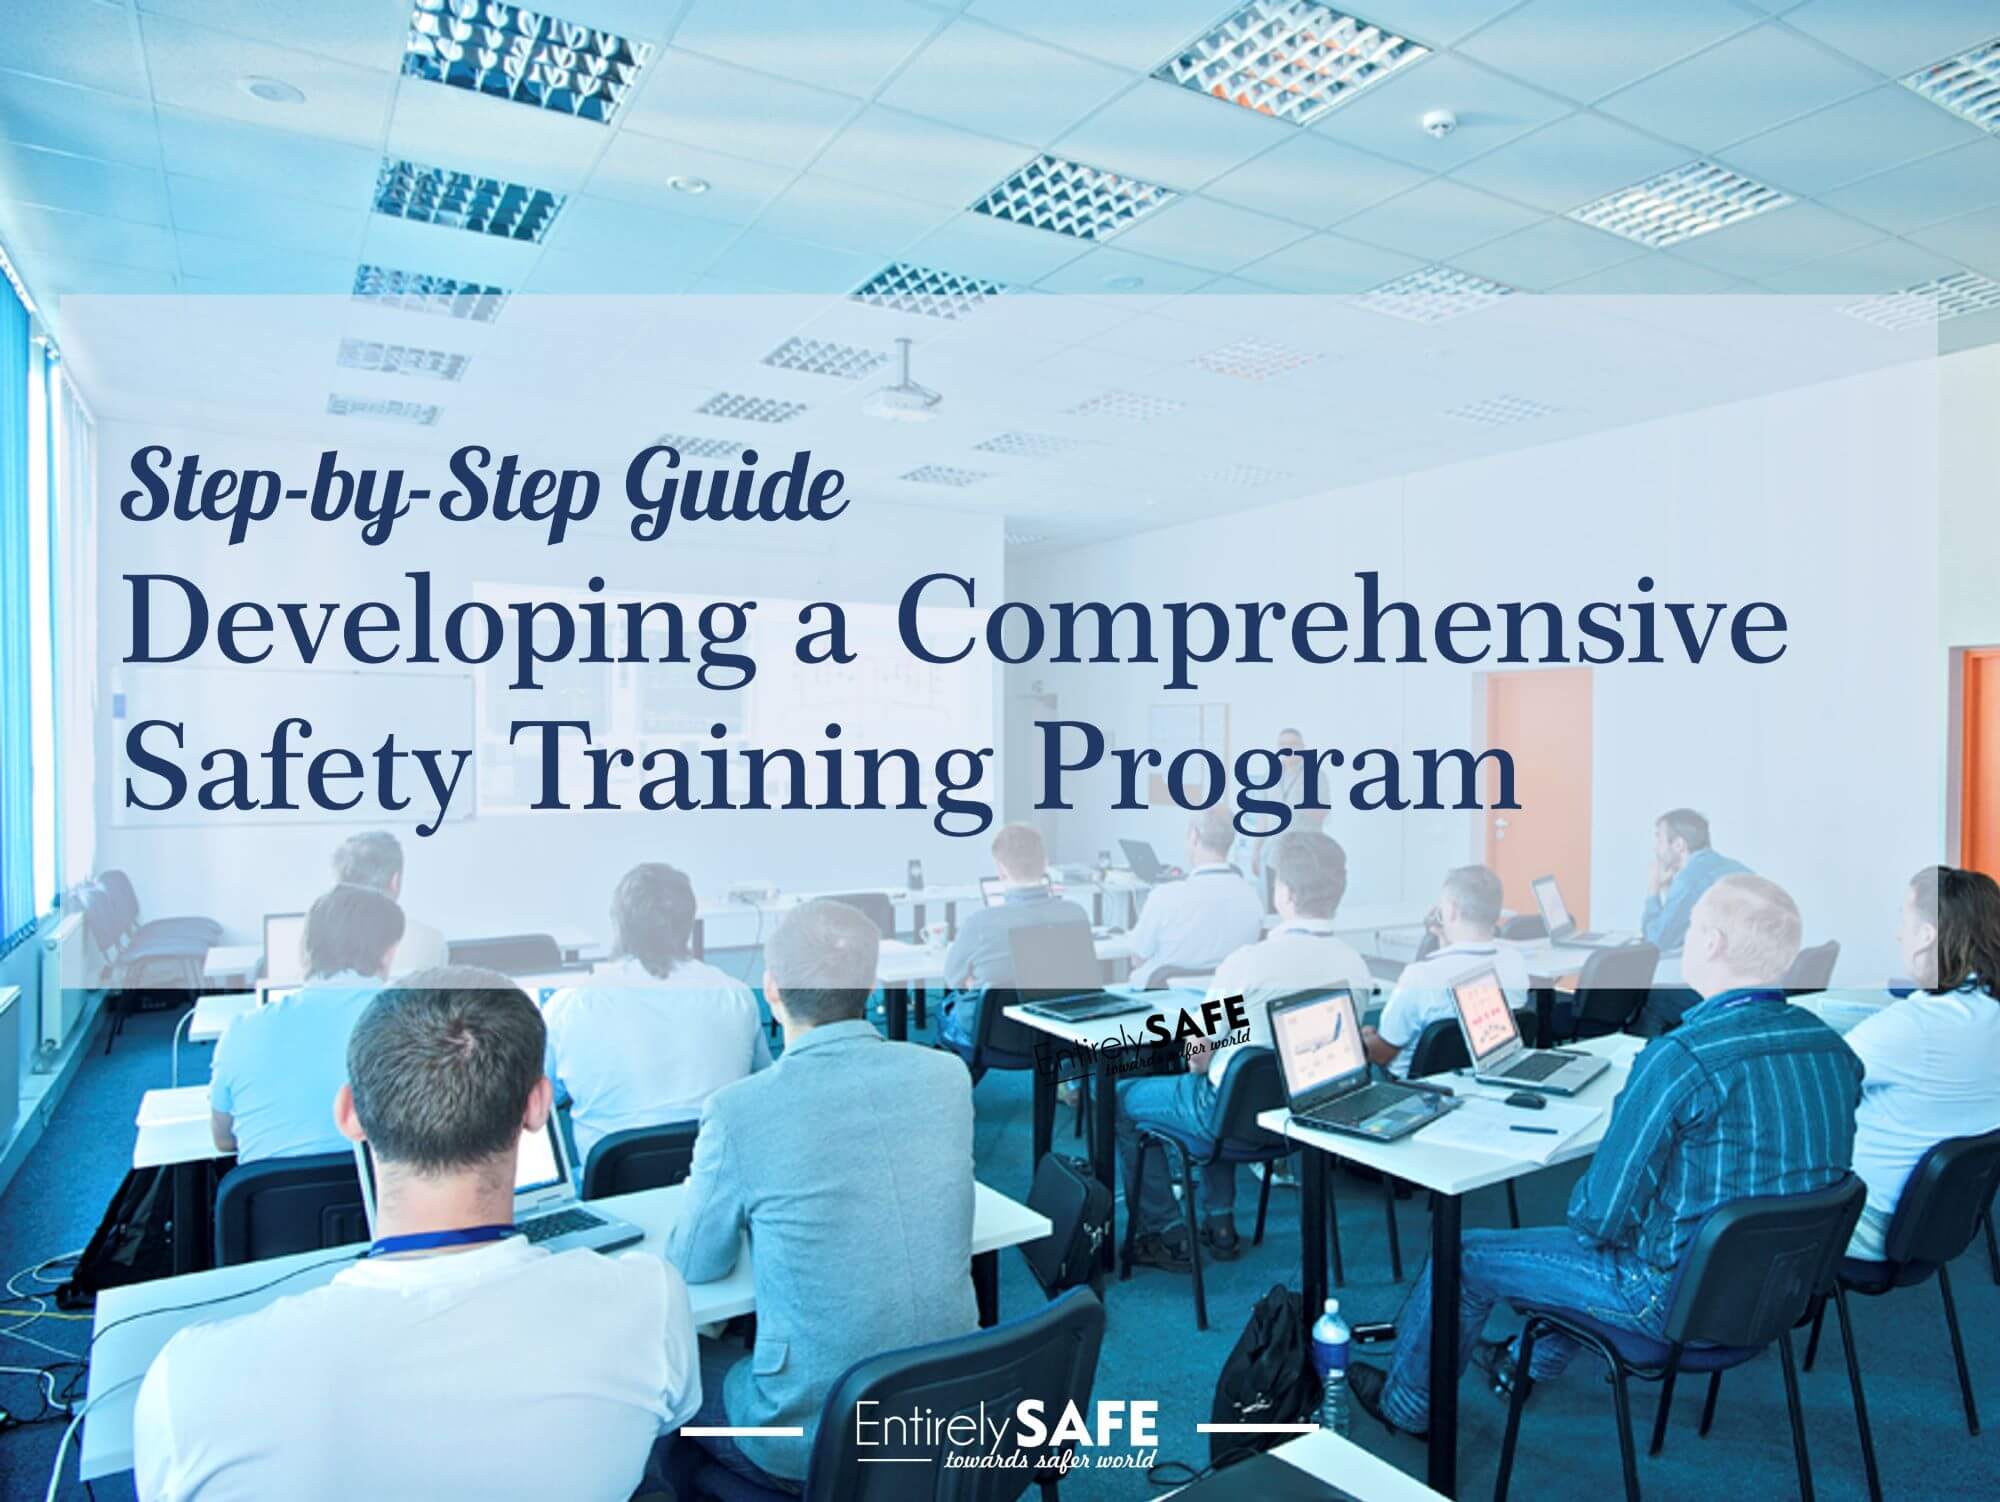 5 Steps to Developing a Comprehensive Safety Training Program (1)